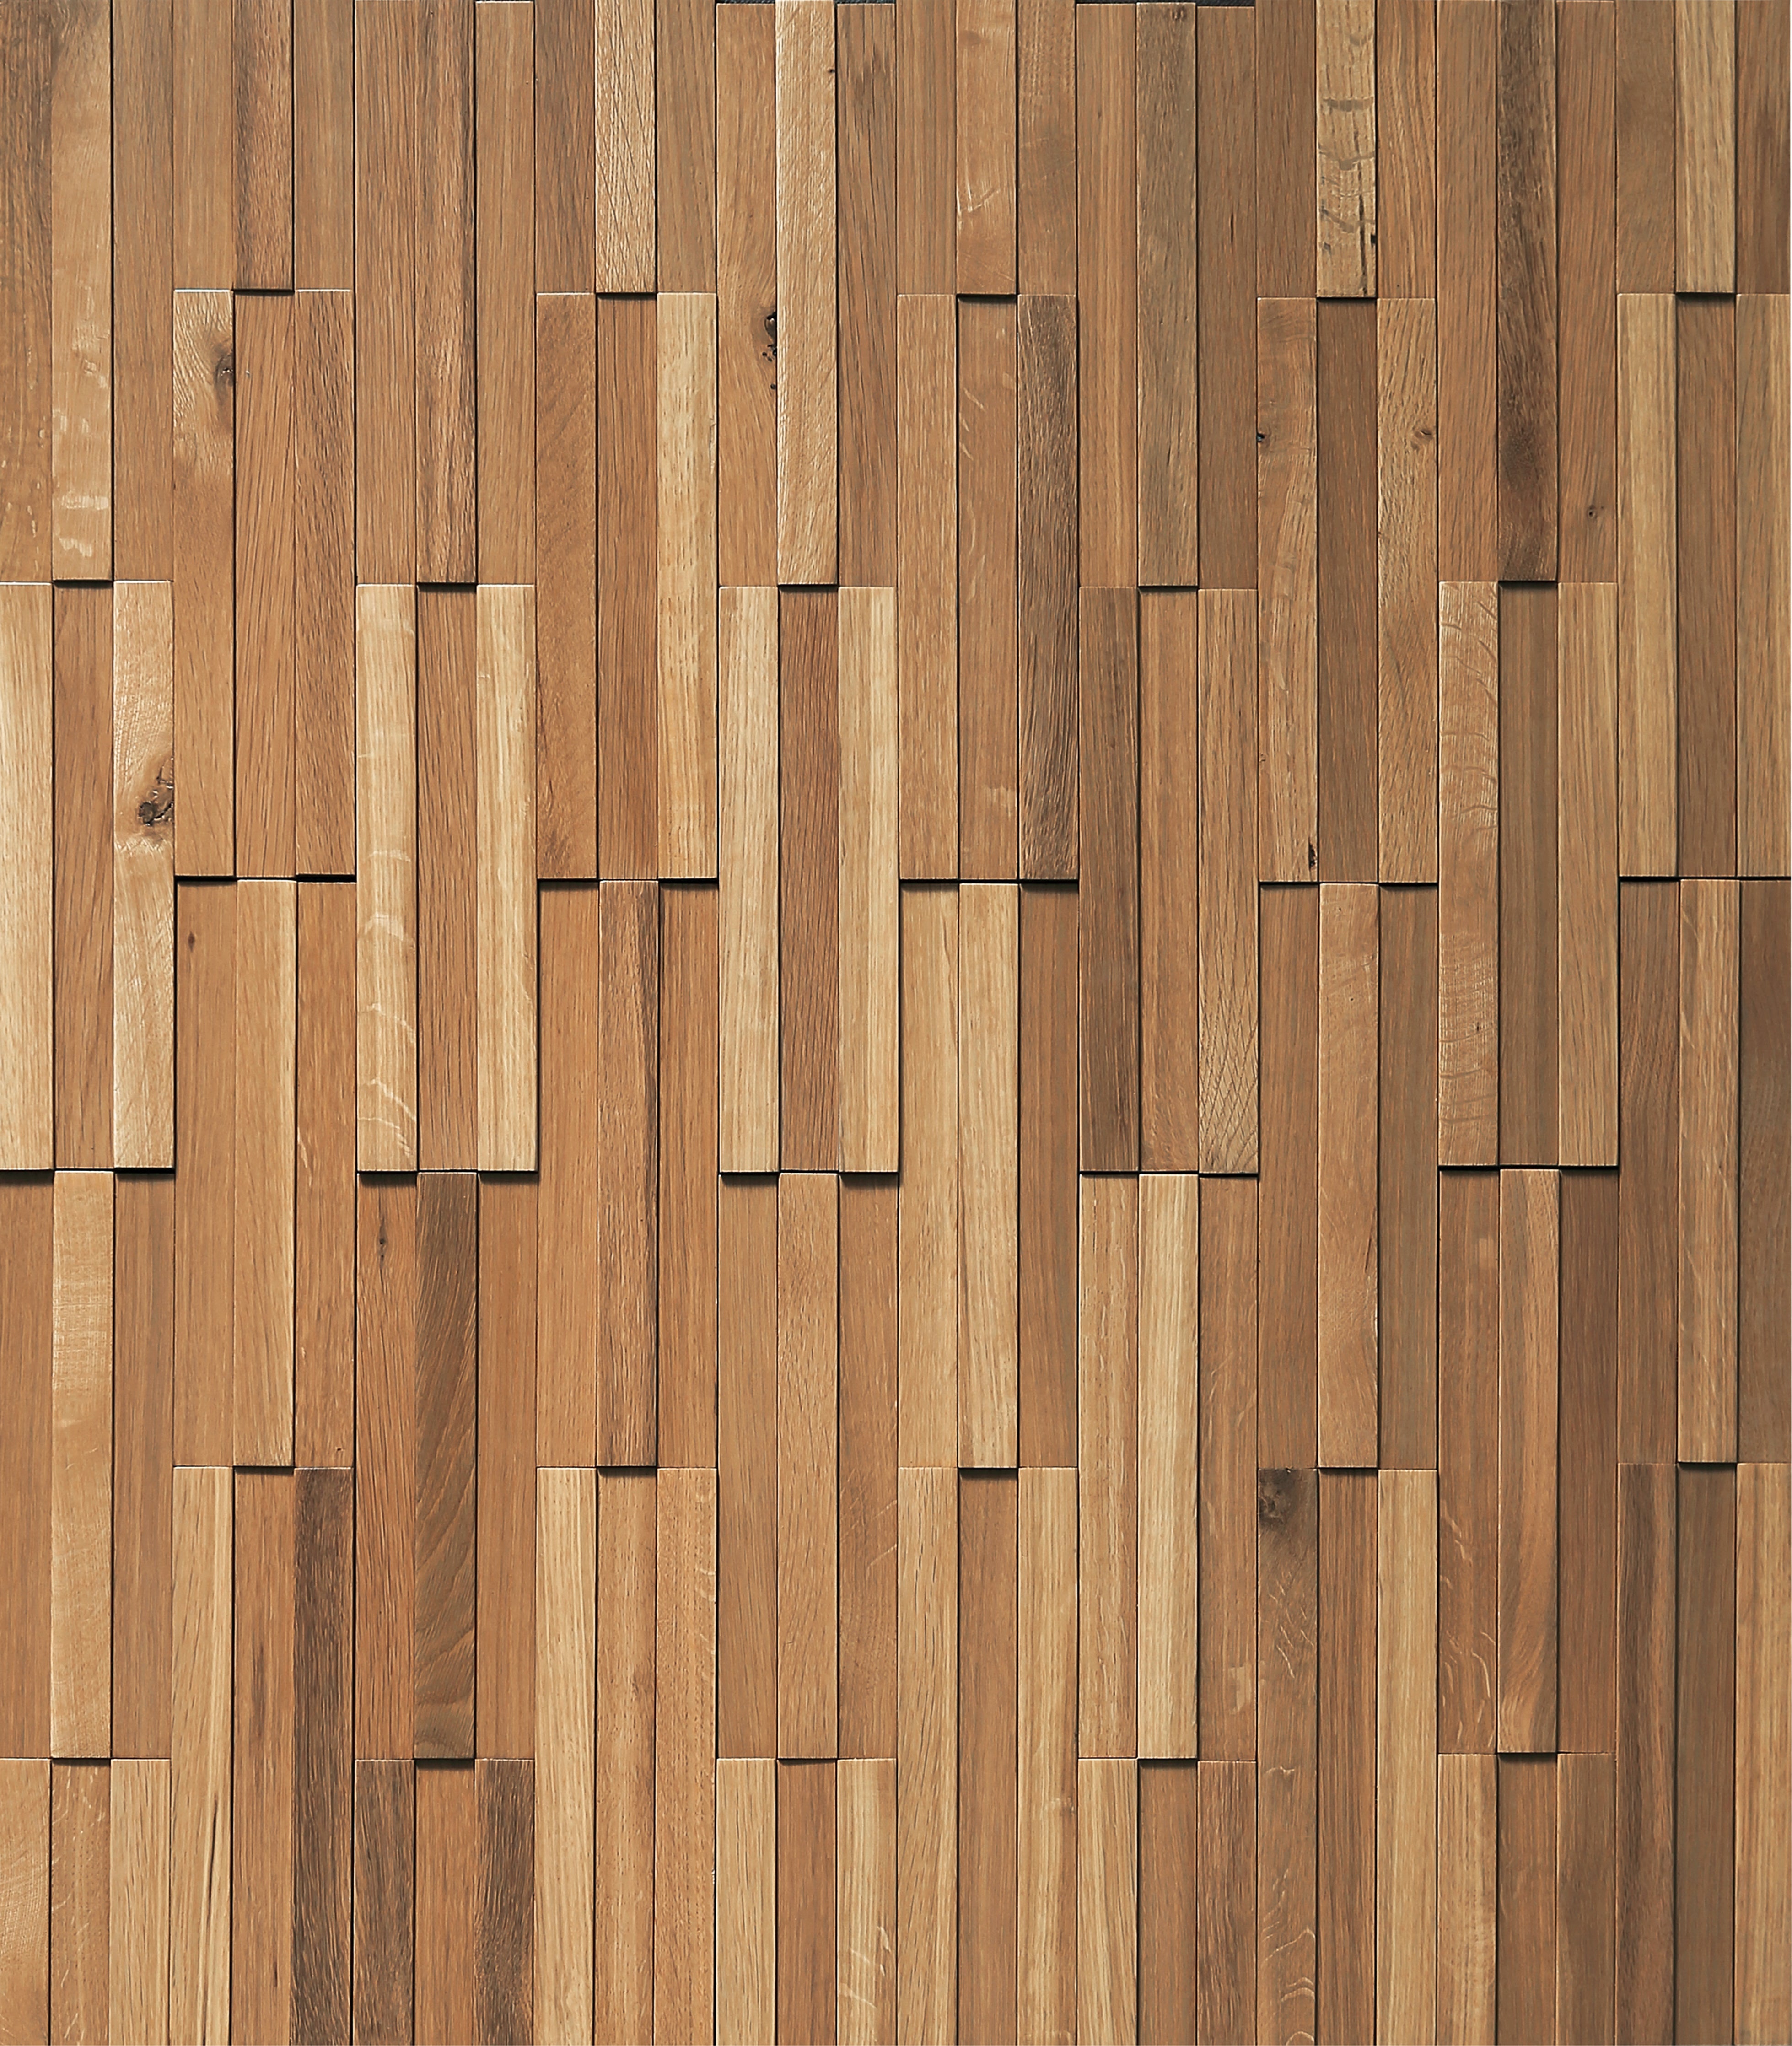 duchateau inceptiv kuadra olde dutch oak three dimensional wall natural wood panel lacquer for interior use distributed by surface group international